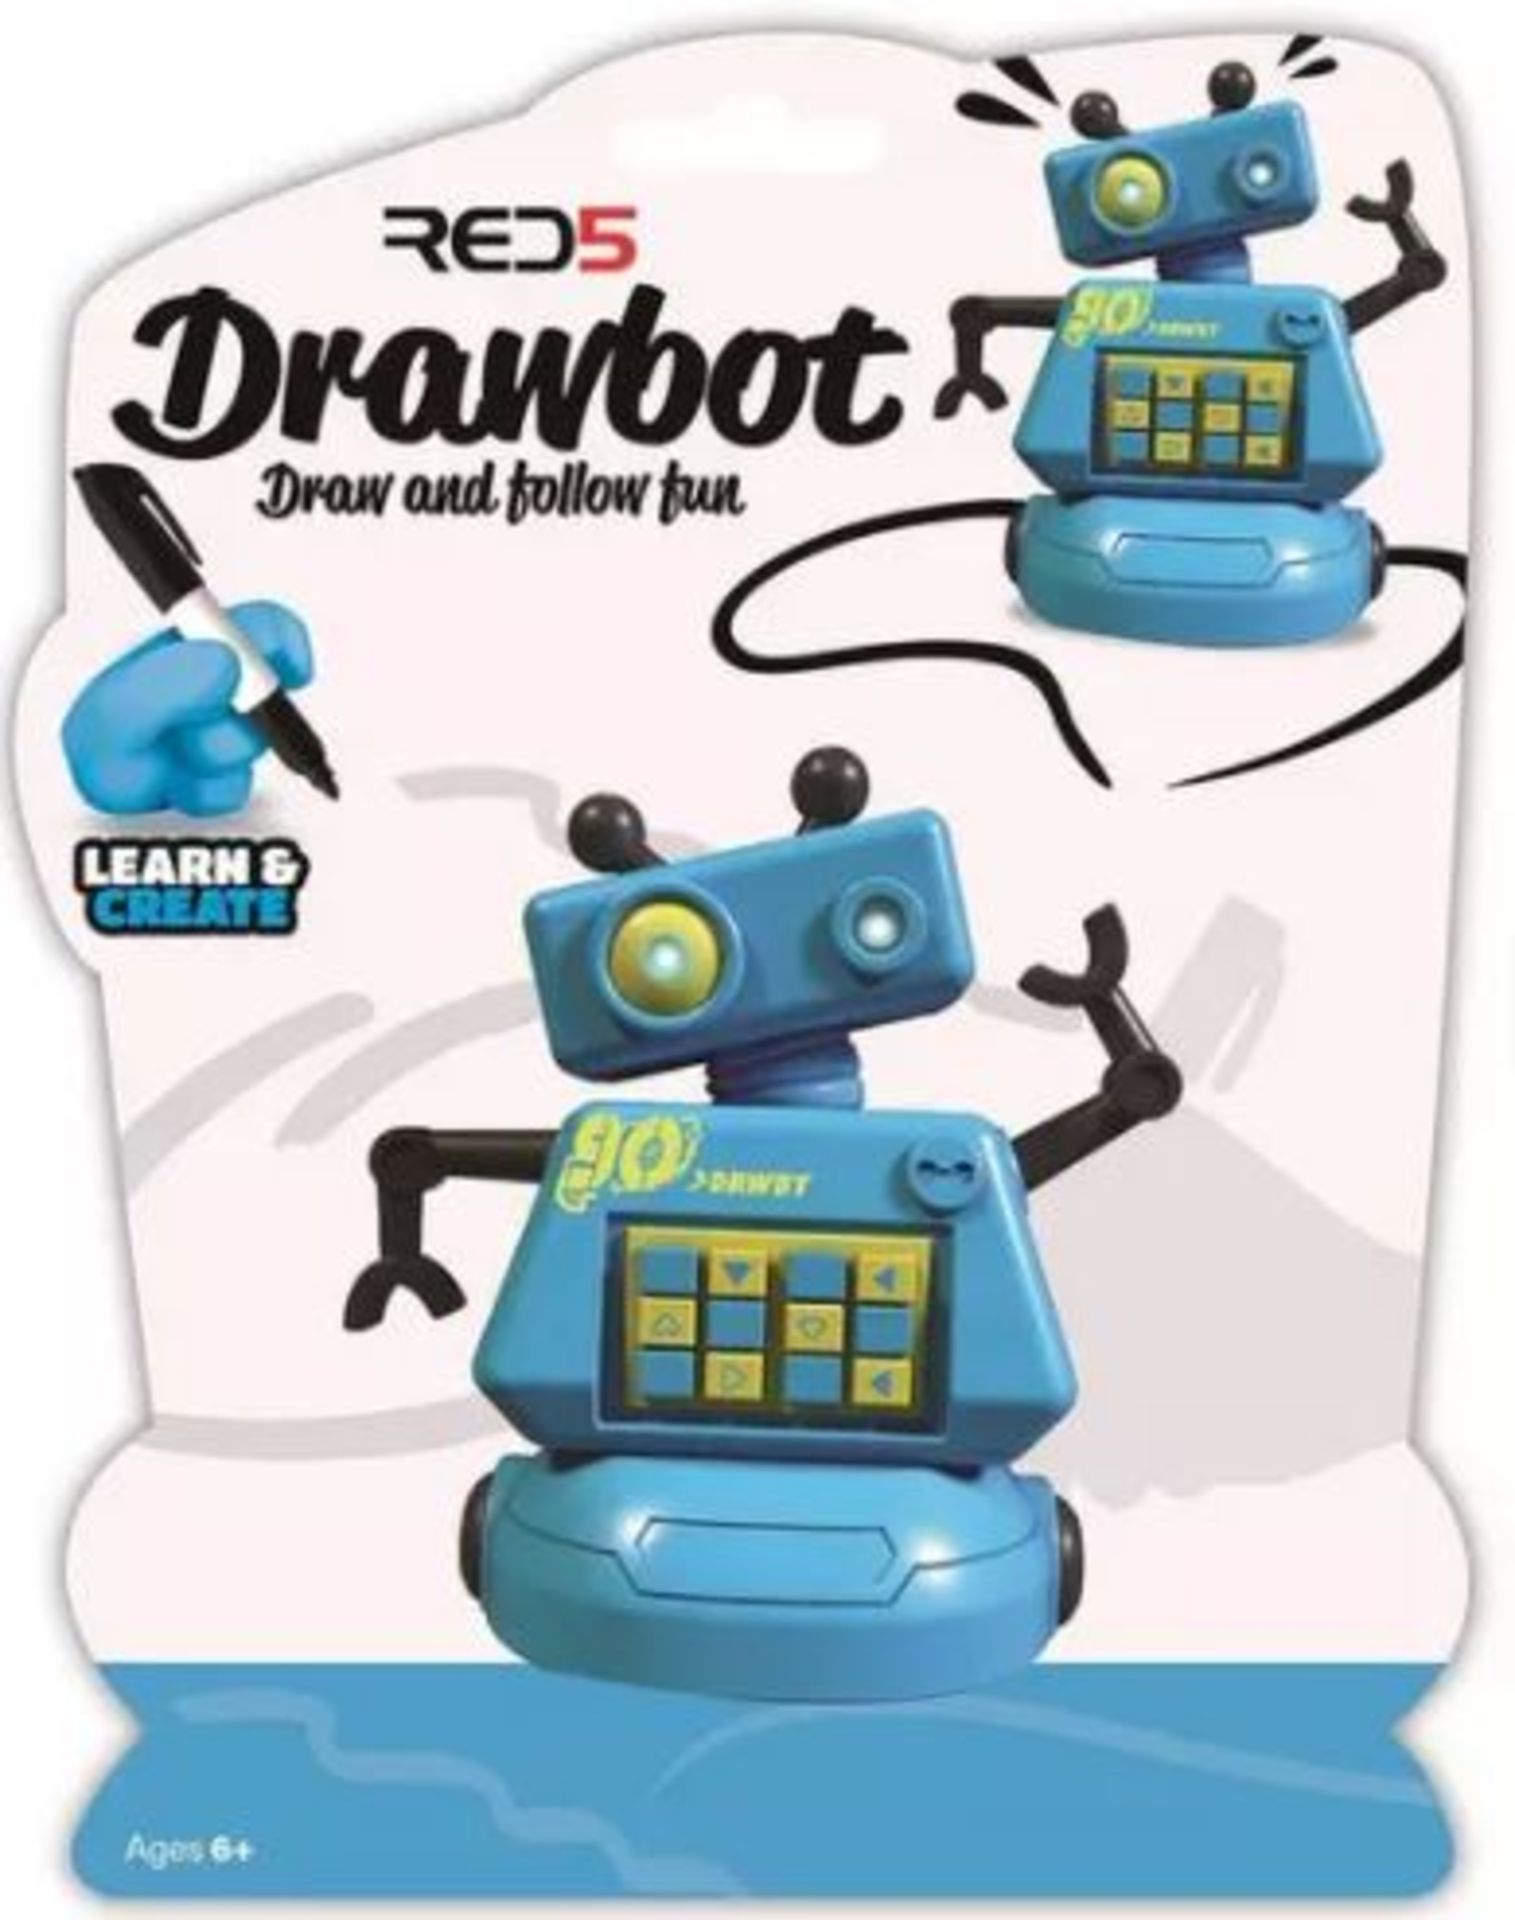 (P6) 16x Red 5 Drawbot RRP £12 Each. (All Units New, Sealed Item).